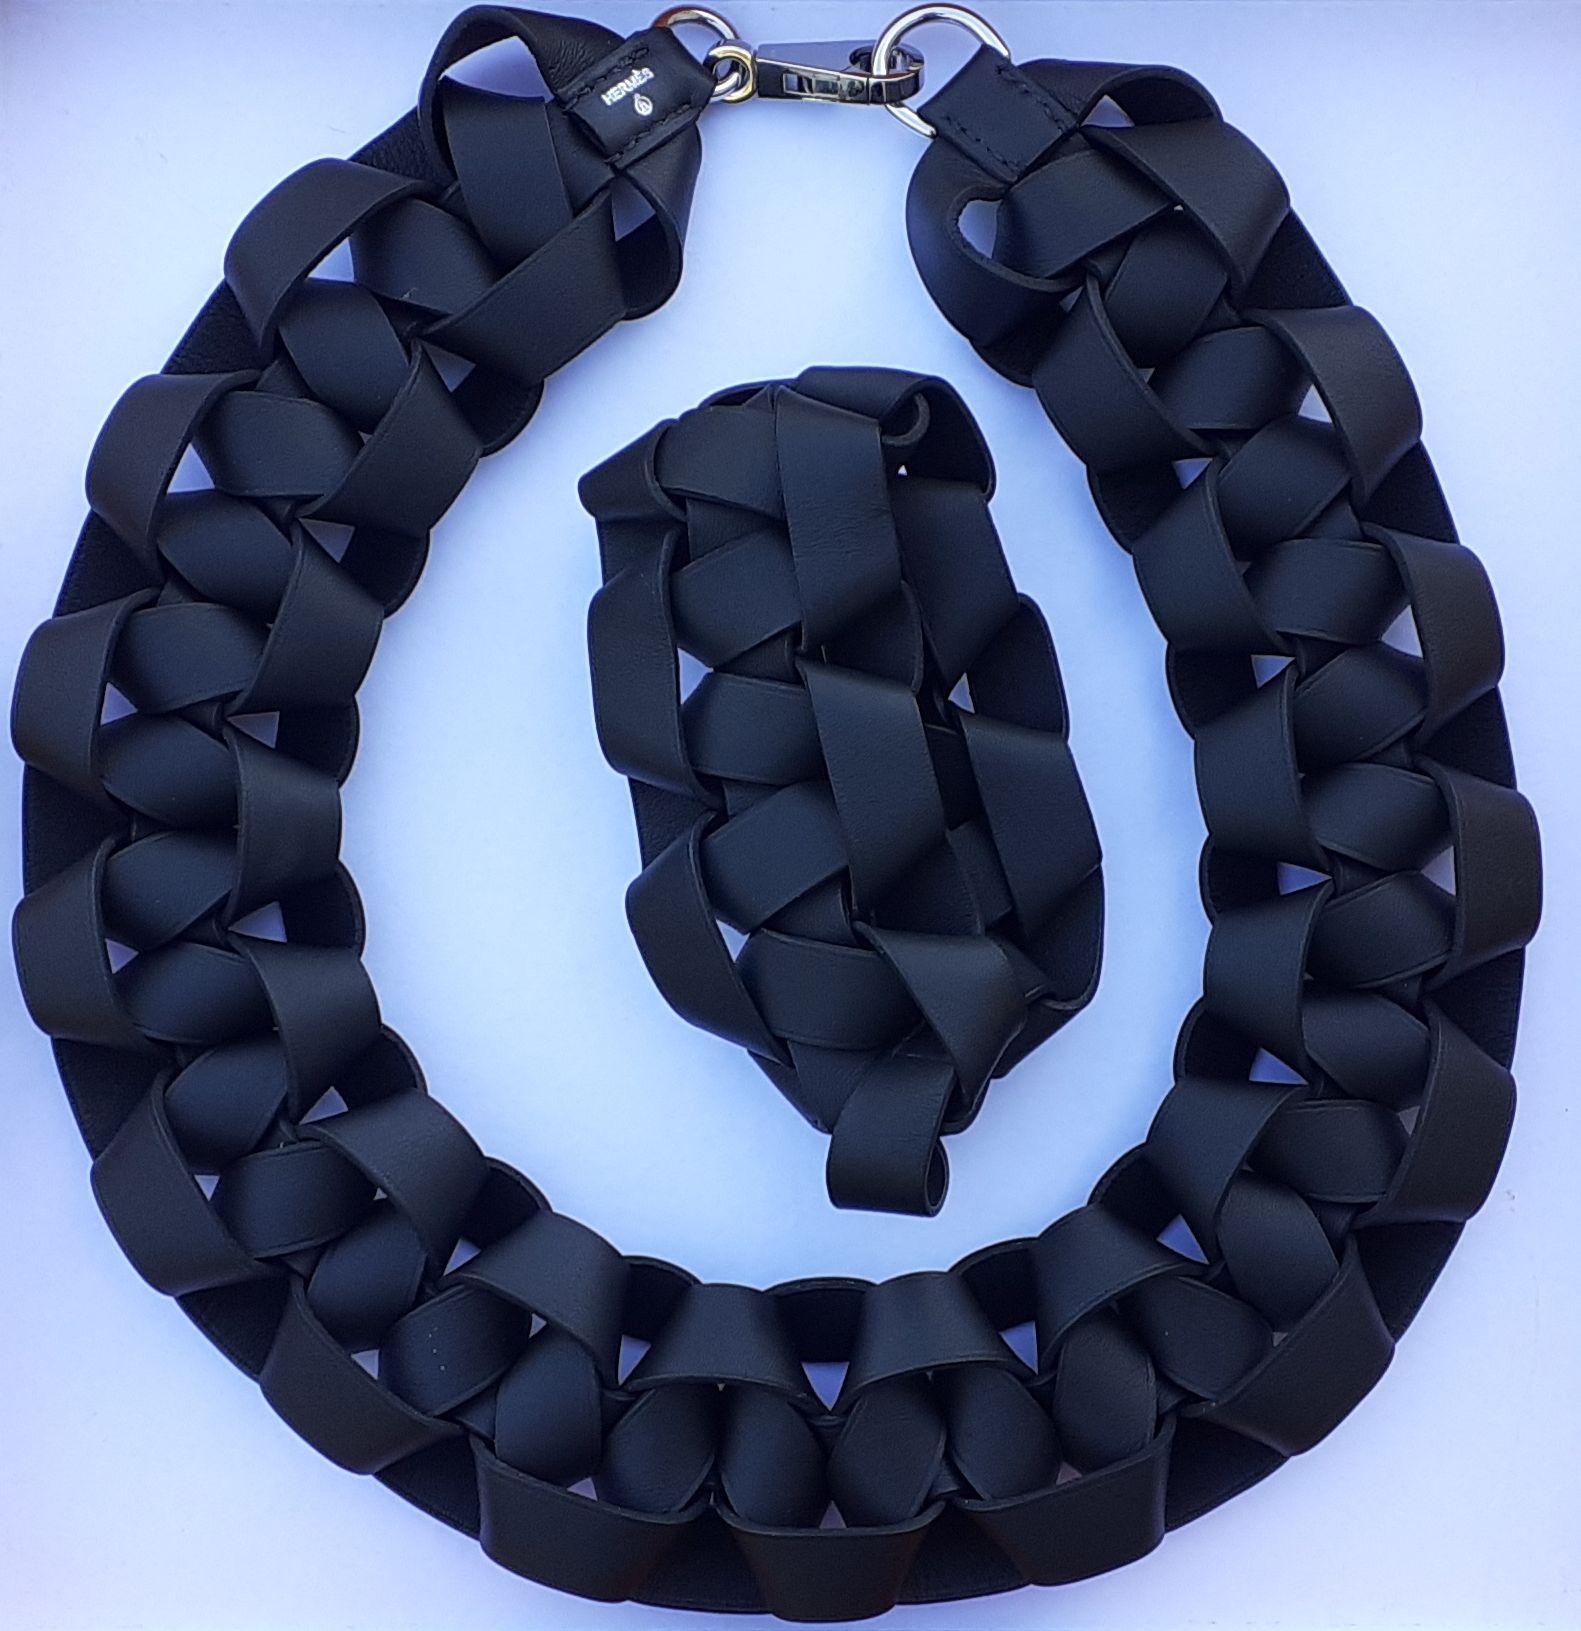 Rare and Beautiful Authentic Hermès Set

Includes 1 necklace and 1 matching bracelet

Pattern: sophisticated braid

Made of Smooth Leather and clasp in Palladium Plated Hardware

Colorways: Black, Silver

The bracelet does not open, it should be